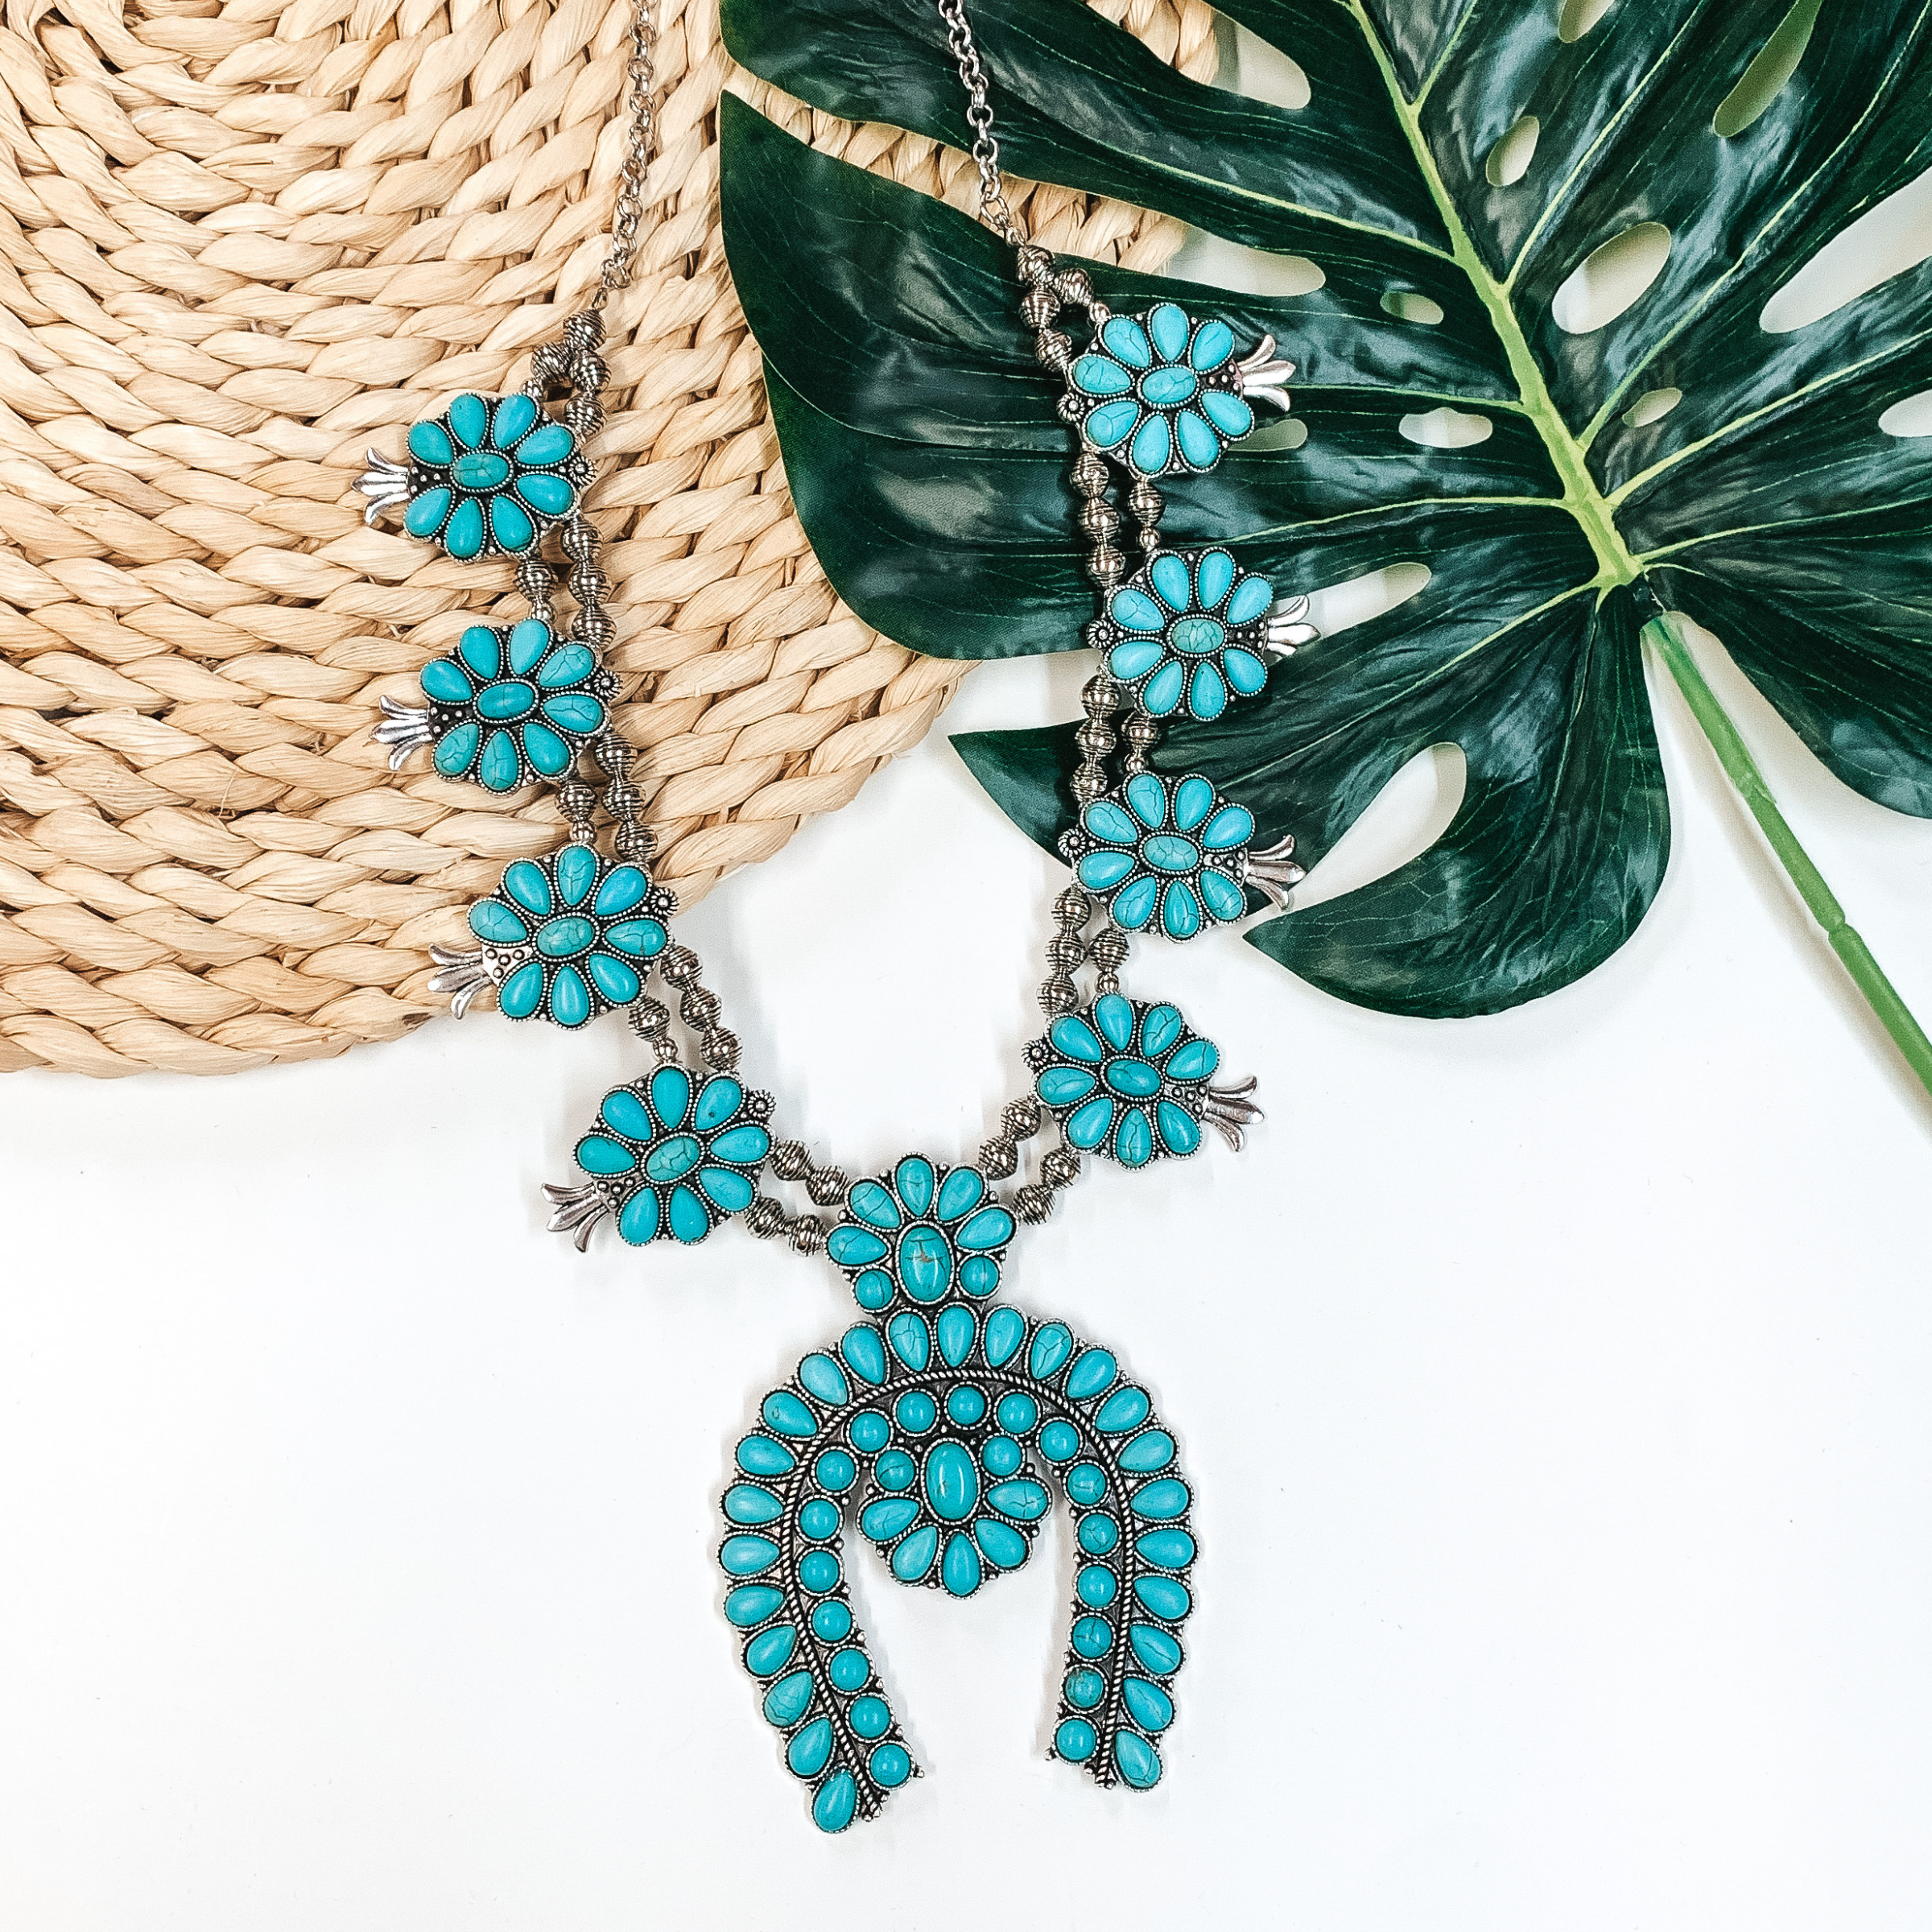 Turquoise and Silver Statement Squash Blossom Necklace - Giddy Up Glamour Boutique